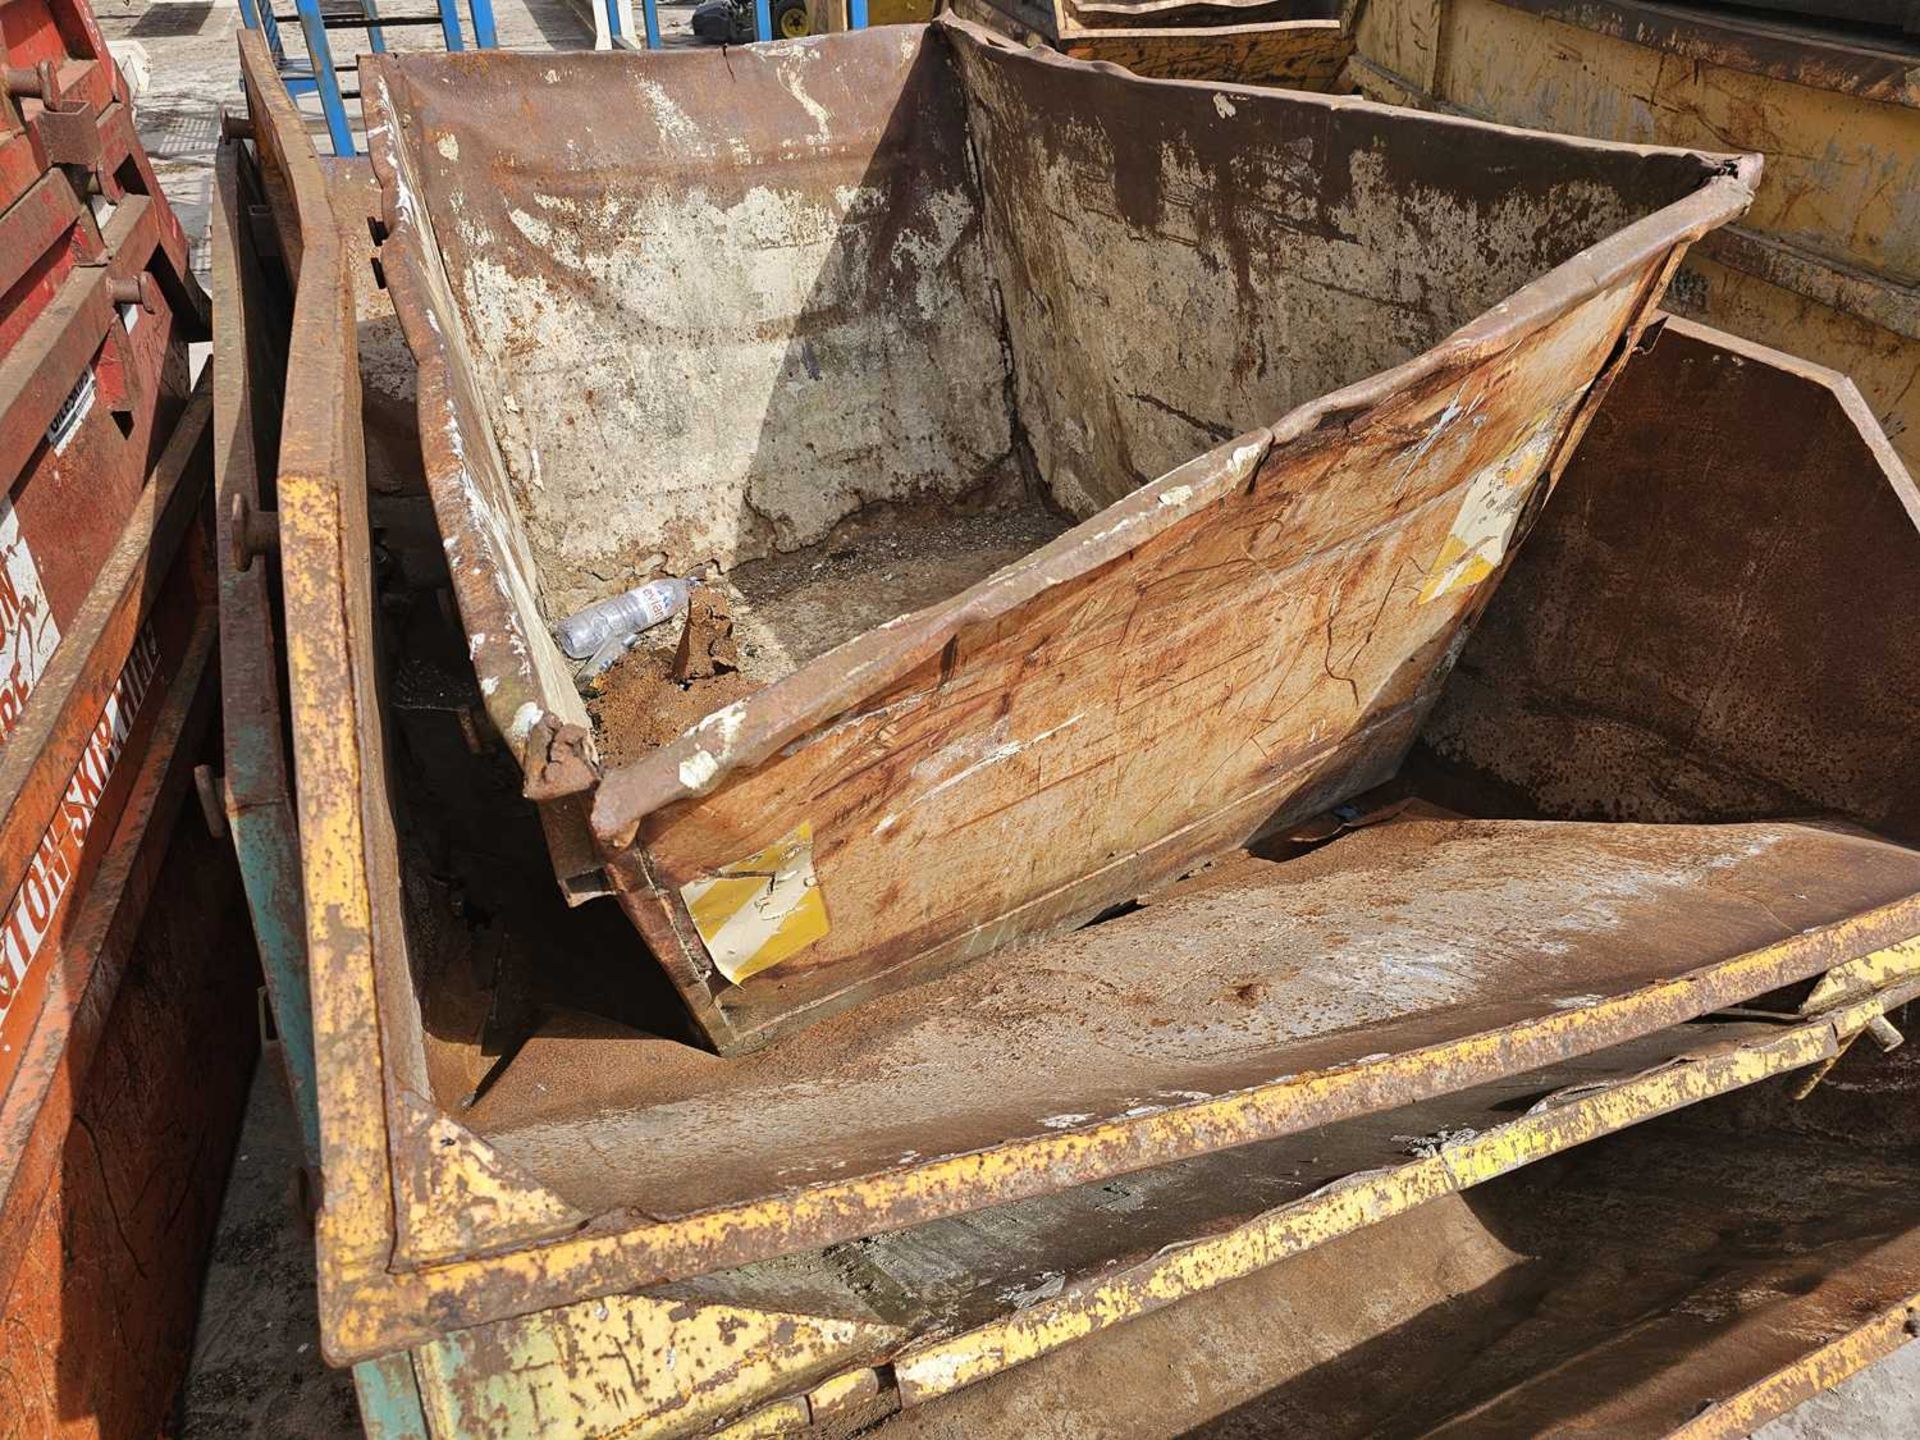 Selection of Skips to suit Skip Loader Lorry (4 of) - Image 5 of 5